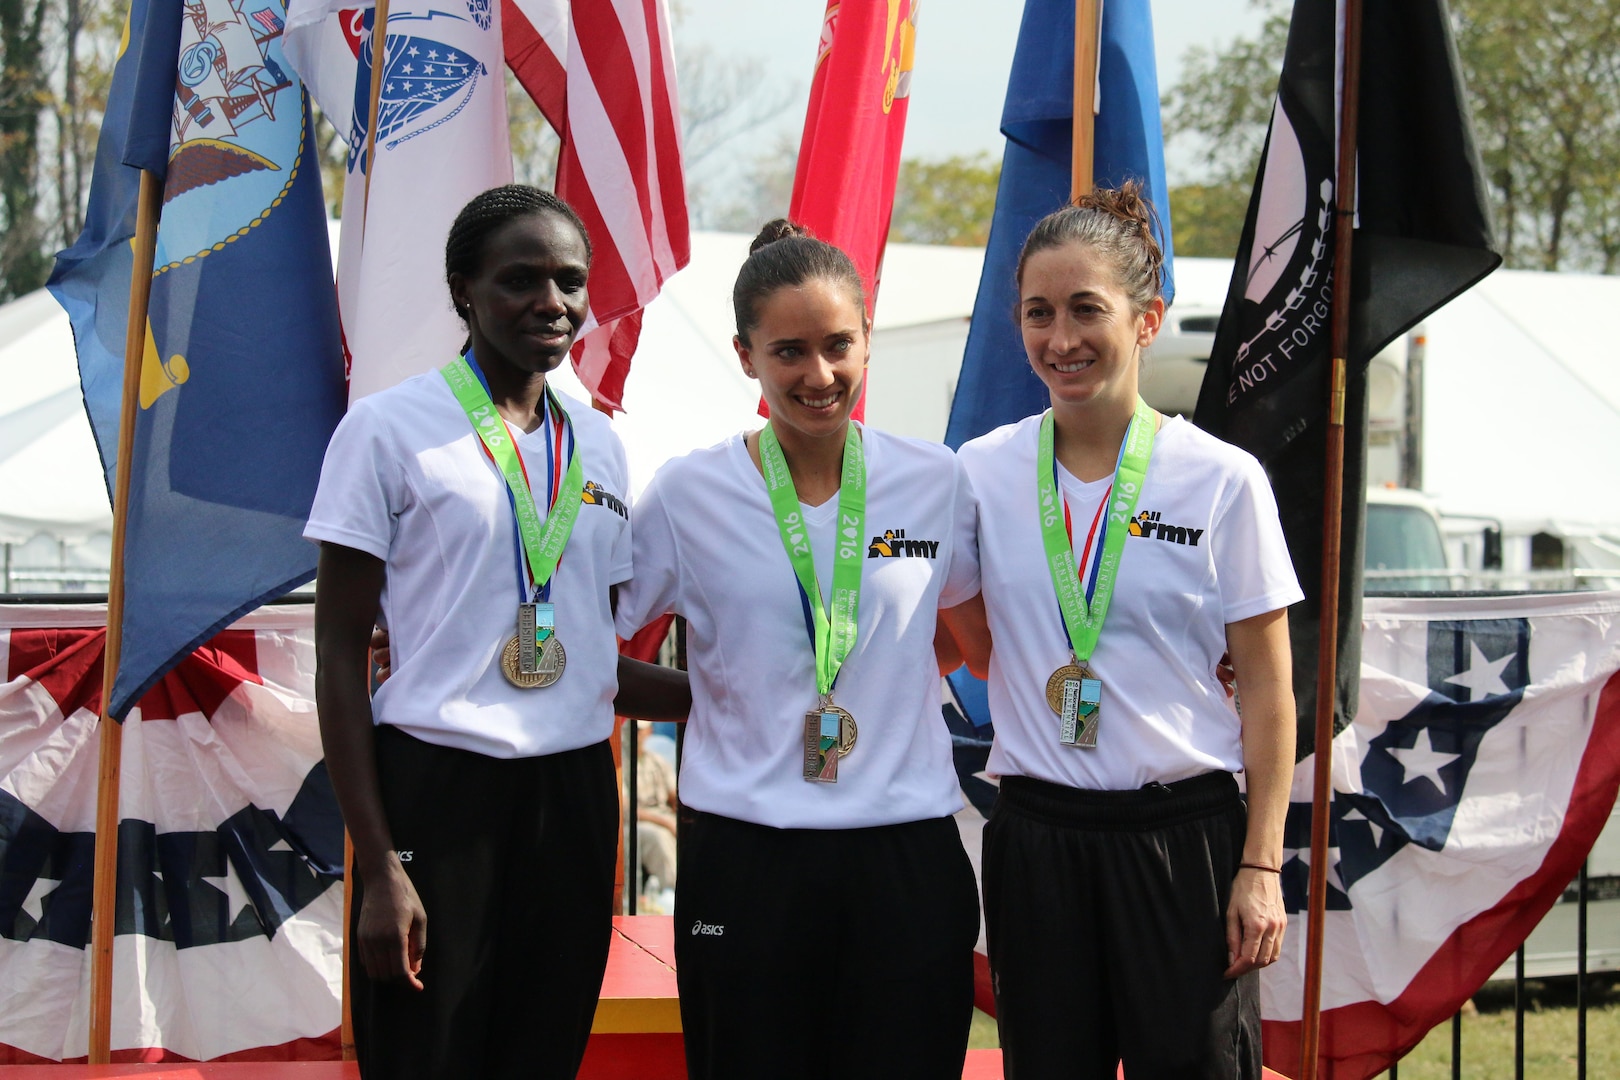 Army captures Armed Forces Women's Marathon Gold. The 2016 Armed Forces Marathon is held in conjunction with the 41st Marine Corps Marathon on 30 October in Washington, D.C. From left to right: Pfc. Susan Tanui, Fort Riley, Kan. - 3:06:26; Capt. Meghan Curran, Denver, Colo. - 2:53:19; Capt. Nicole Solana, JB Lewis-McChord, Wash. - 3:13:58